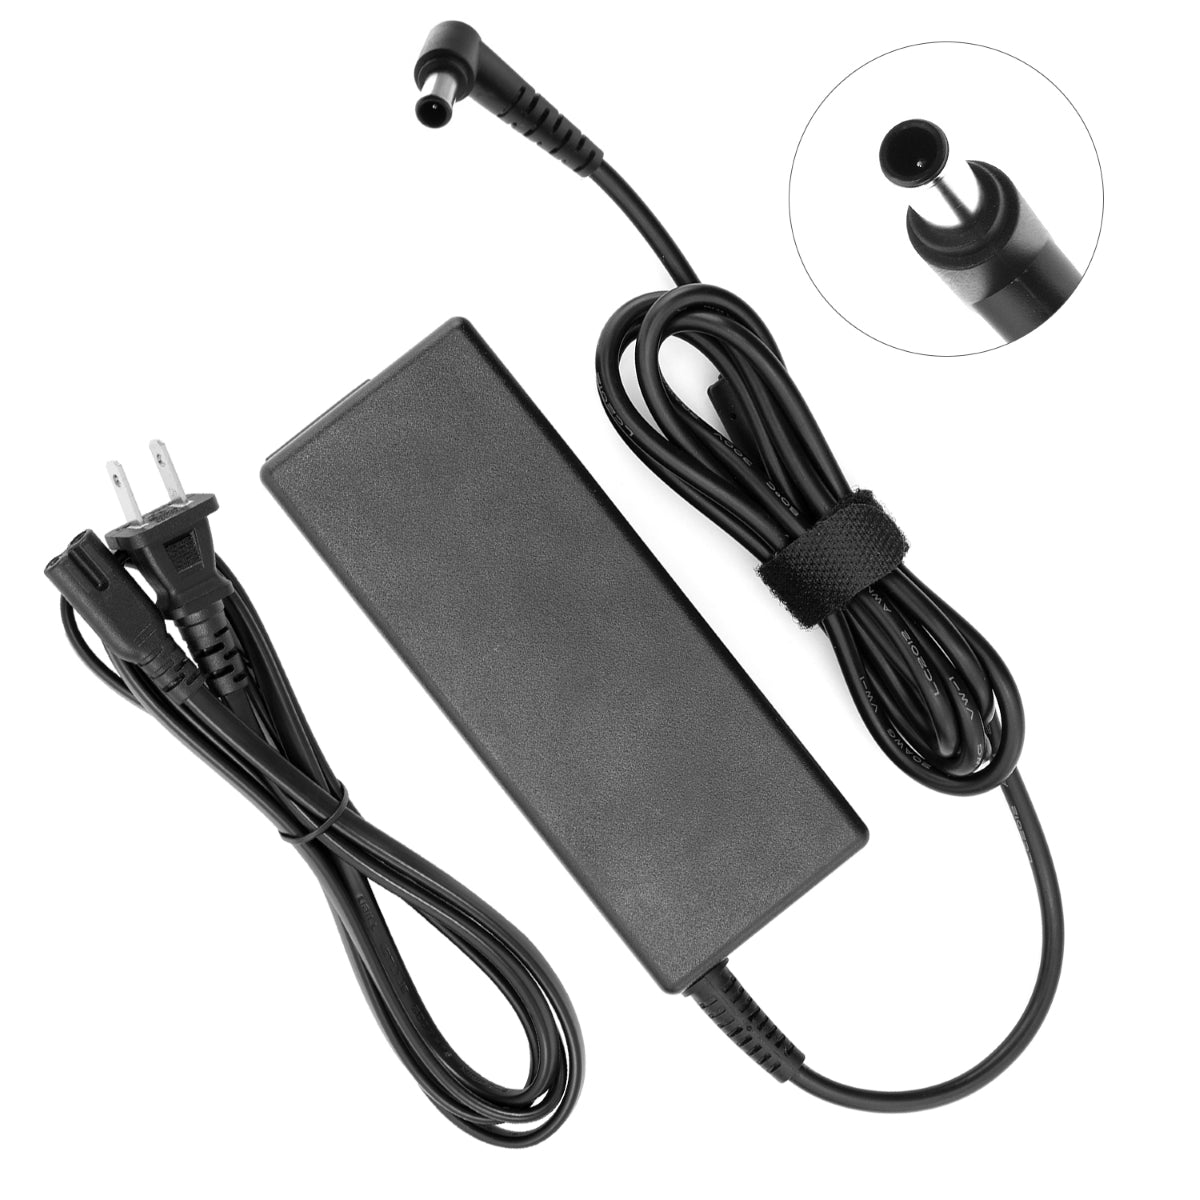 Power Adapter for LG 35WN65C-B Monitor TV